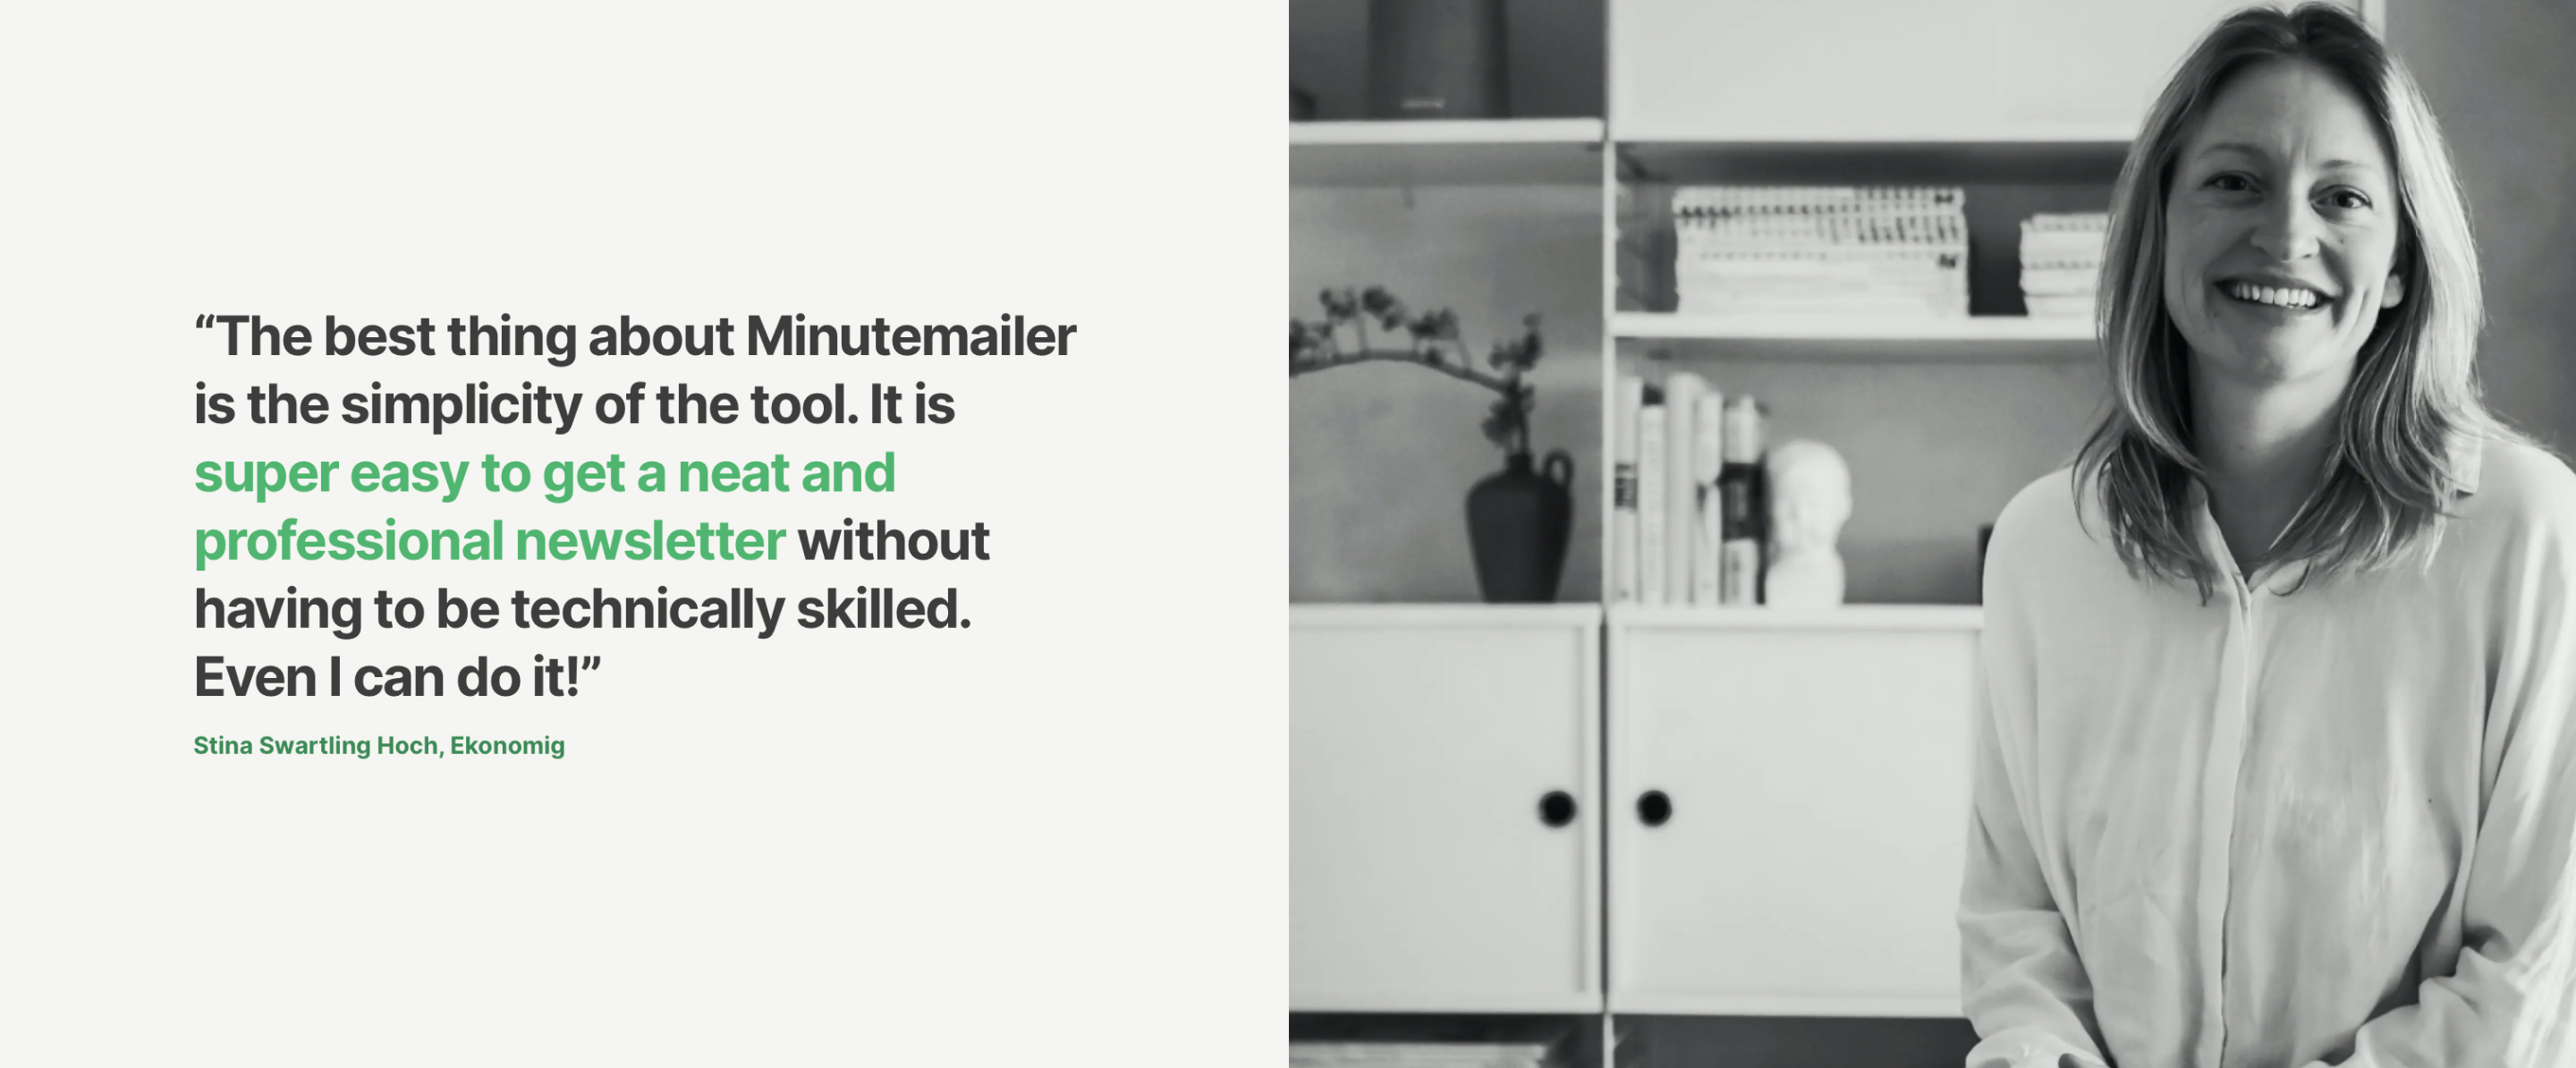 Our customers choose Minutemailer as it's easier to use than the competition, still powerful and affordable.